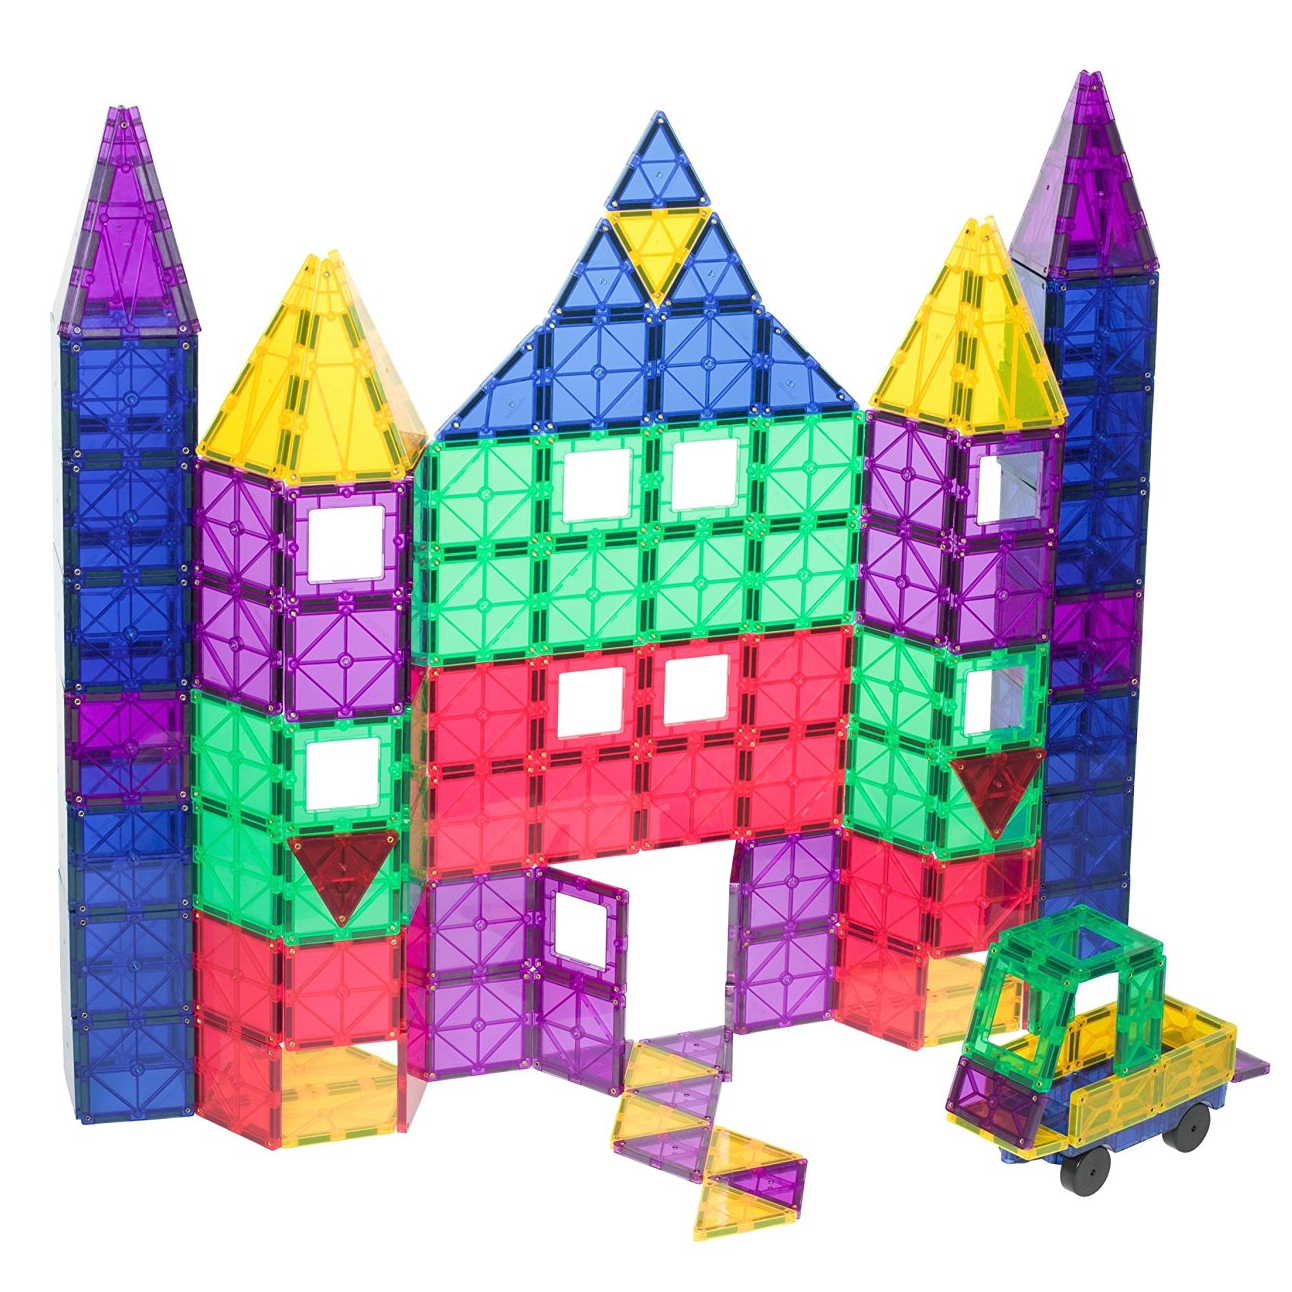 Playmags 100 Piece Clear Colors Magnetic Tiles Building Set with Car & Bonus Bag Only $52.49 Shipped! (Reg $109)